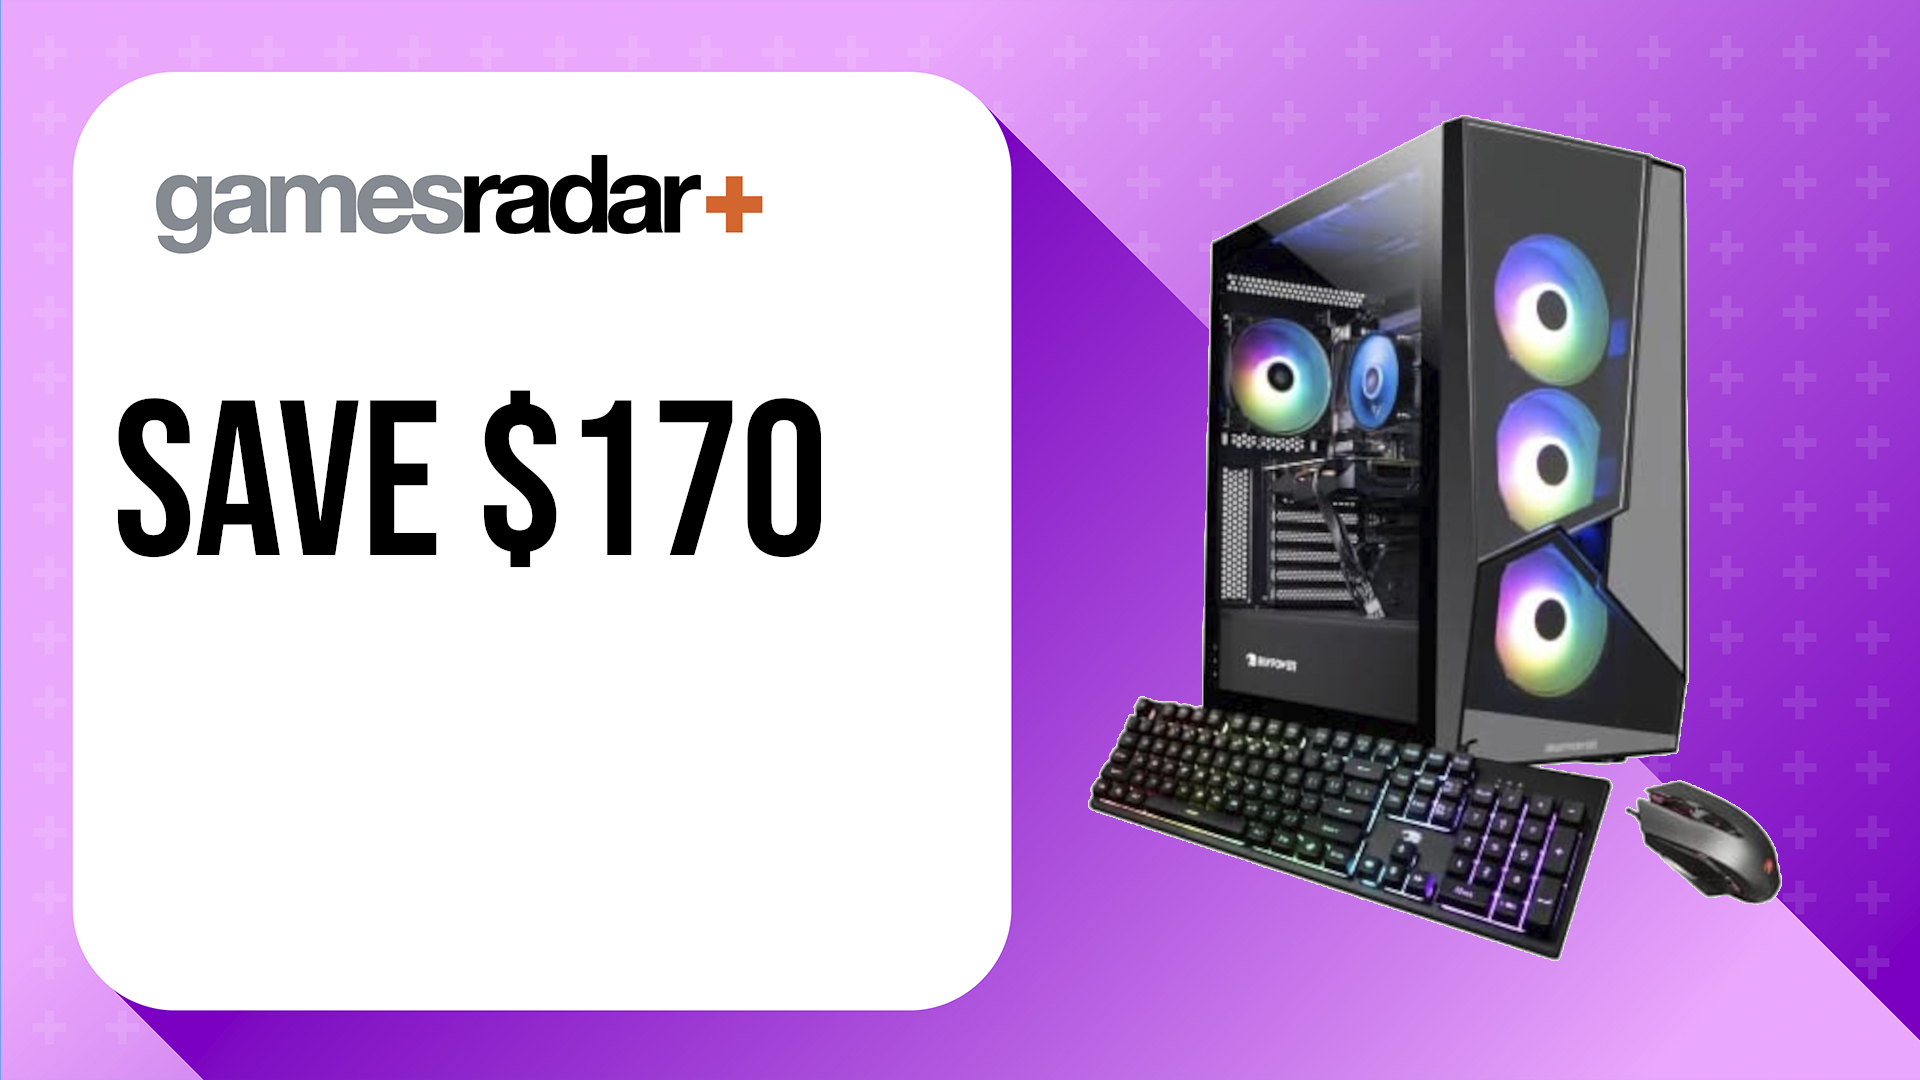 Cyber Monday gaming PC deals